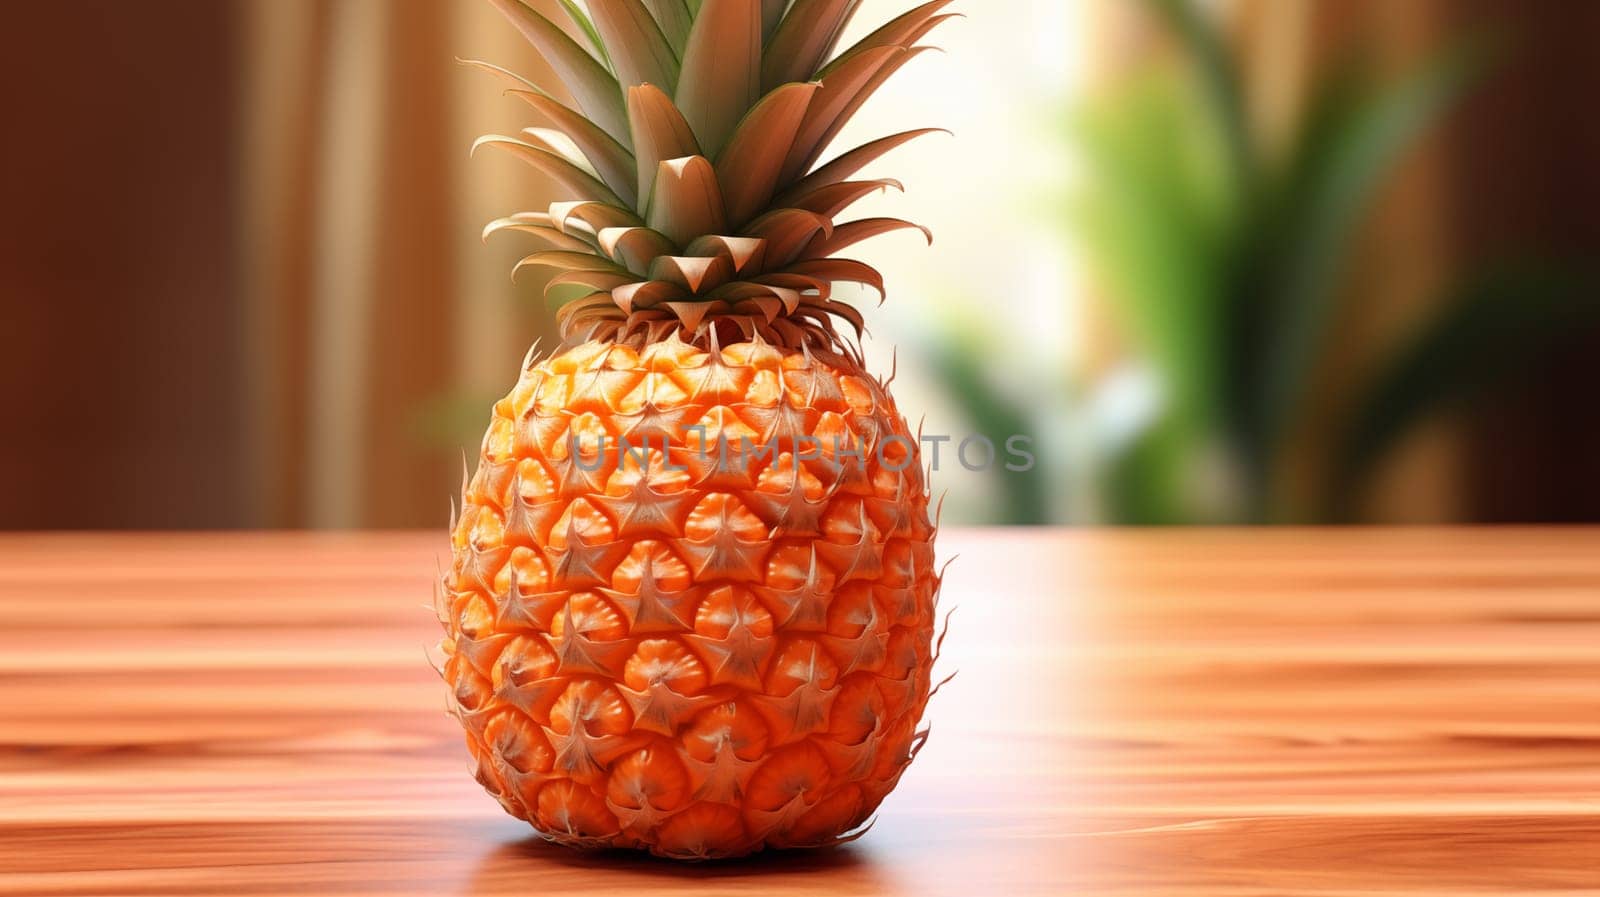 A pineapple stands on a wooden table in the room, a blurred background with a plant by the window by Zakharova